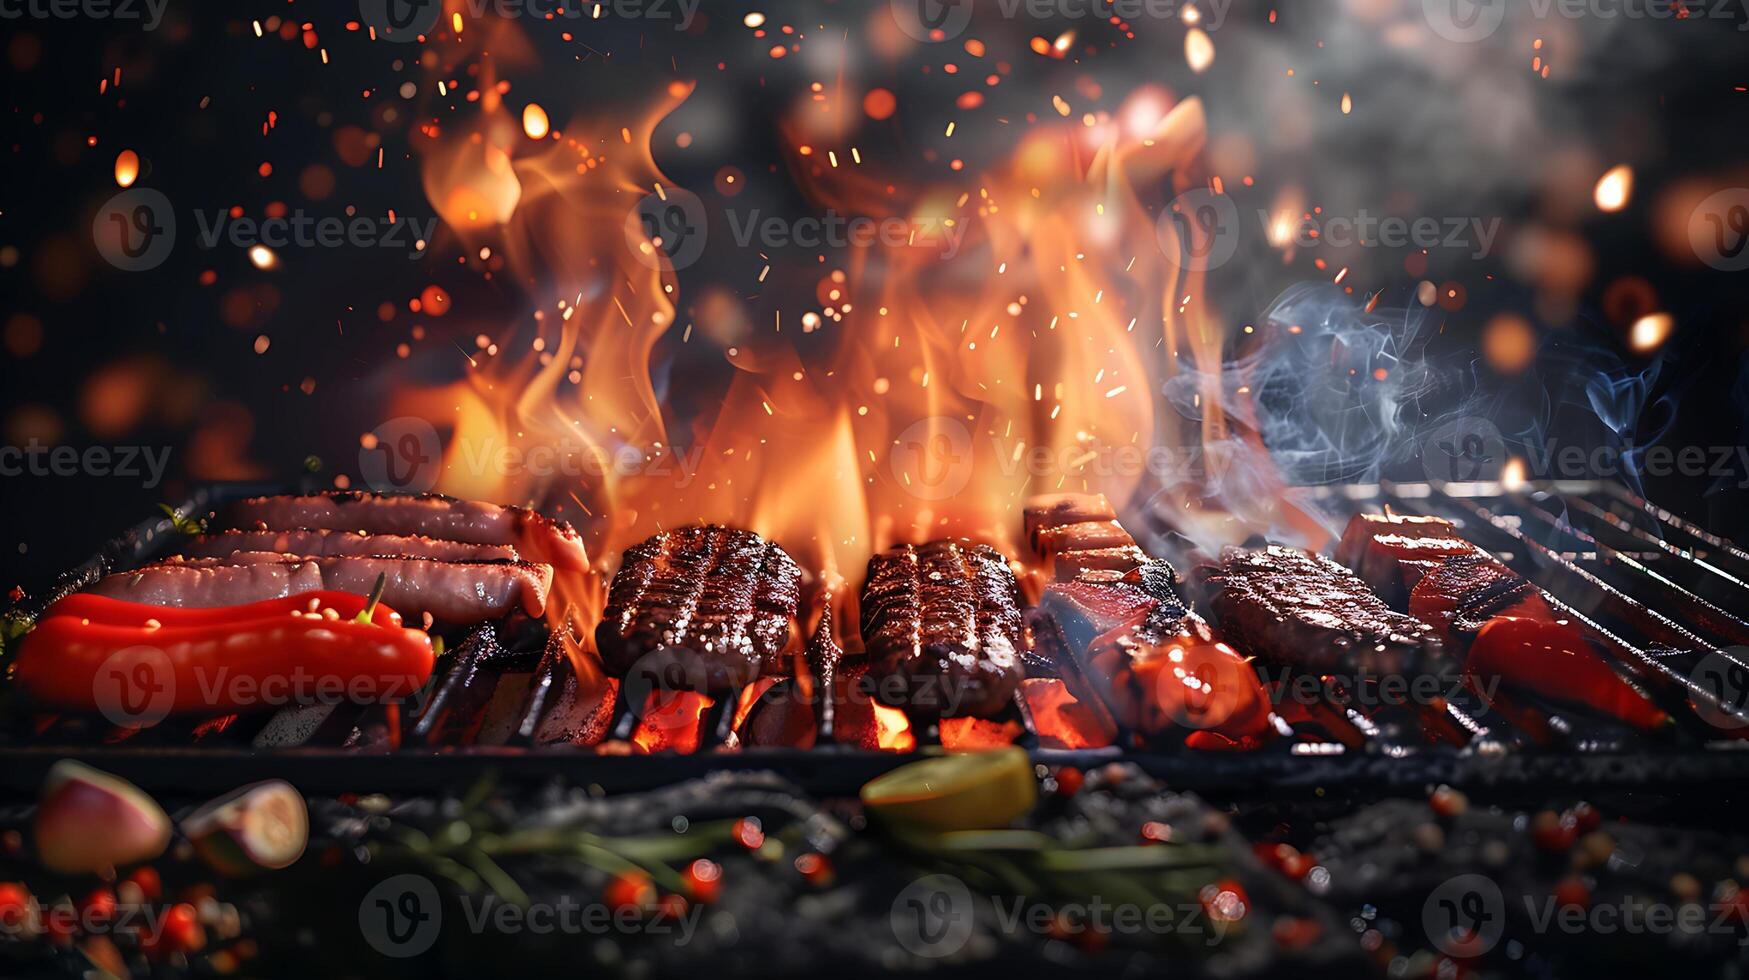 open flaming charcoal grill with various food items cooking on it, showcasing a summer grilling barbecue session with copy space photo